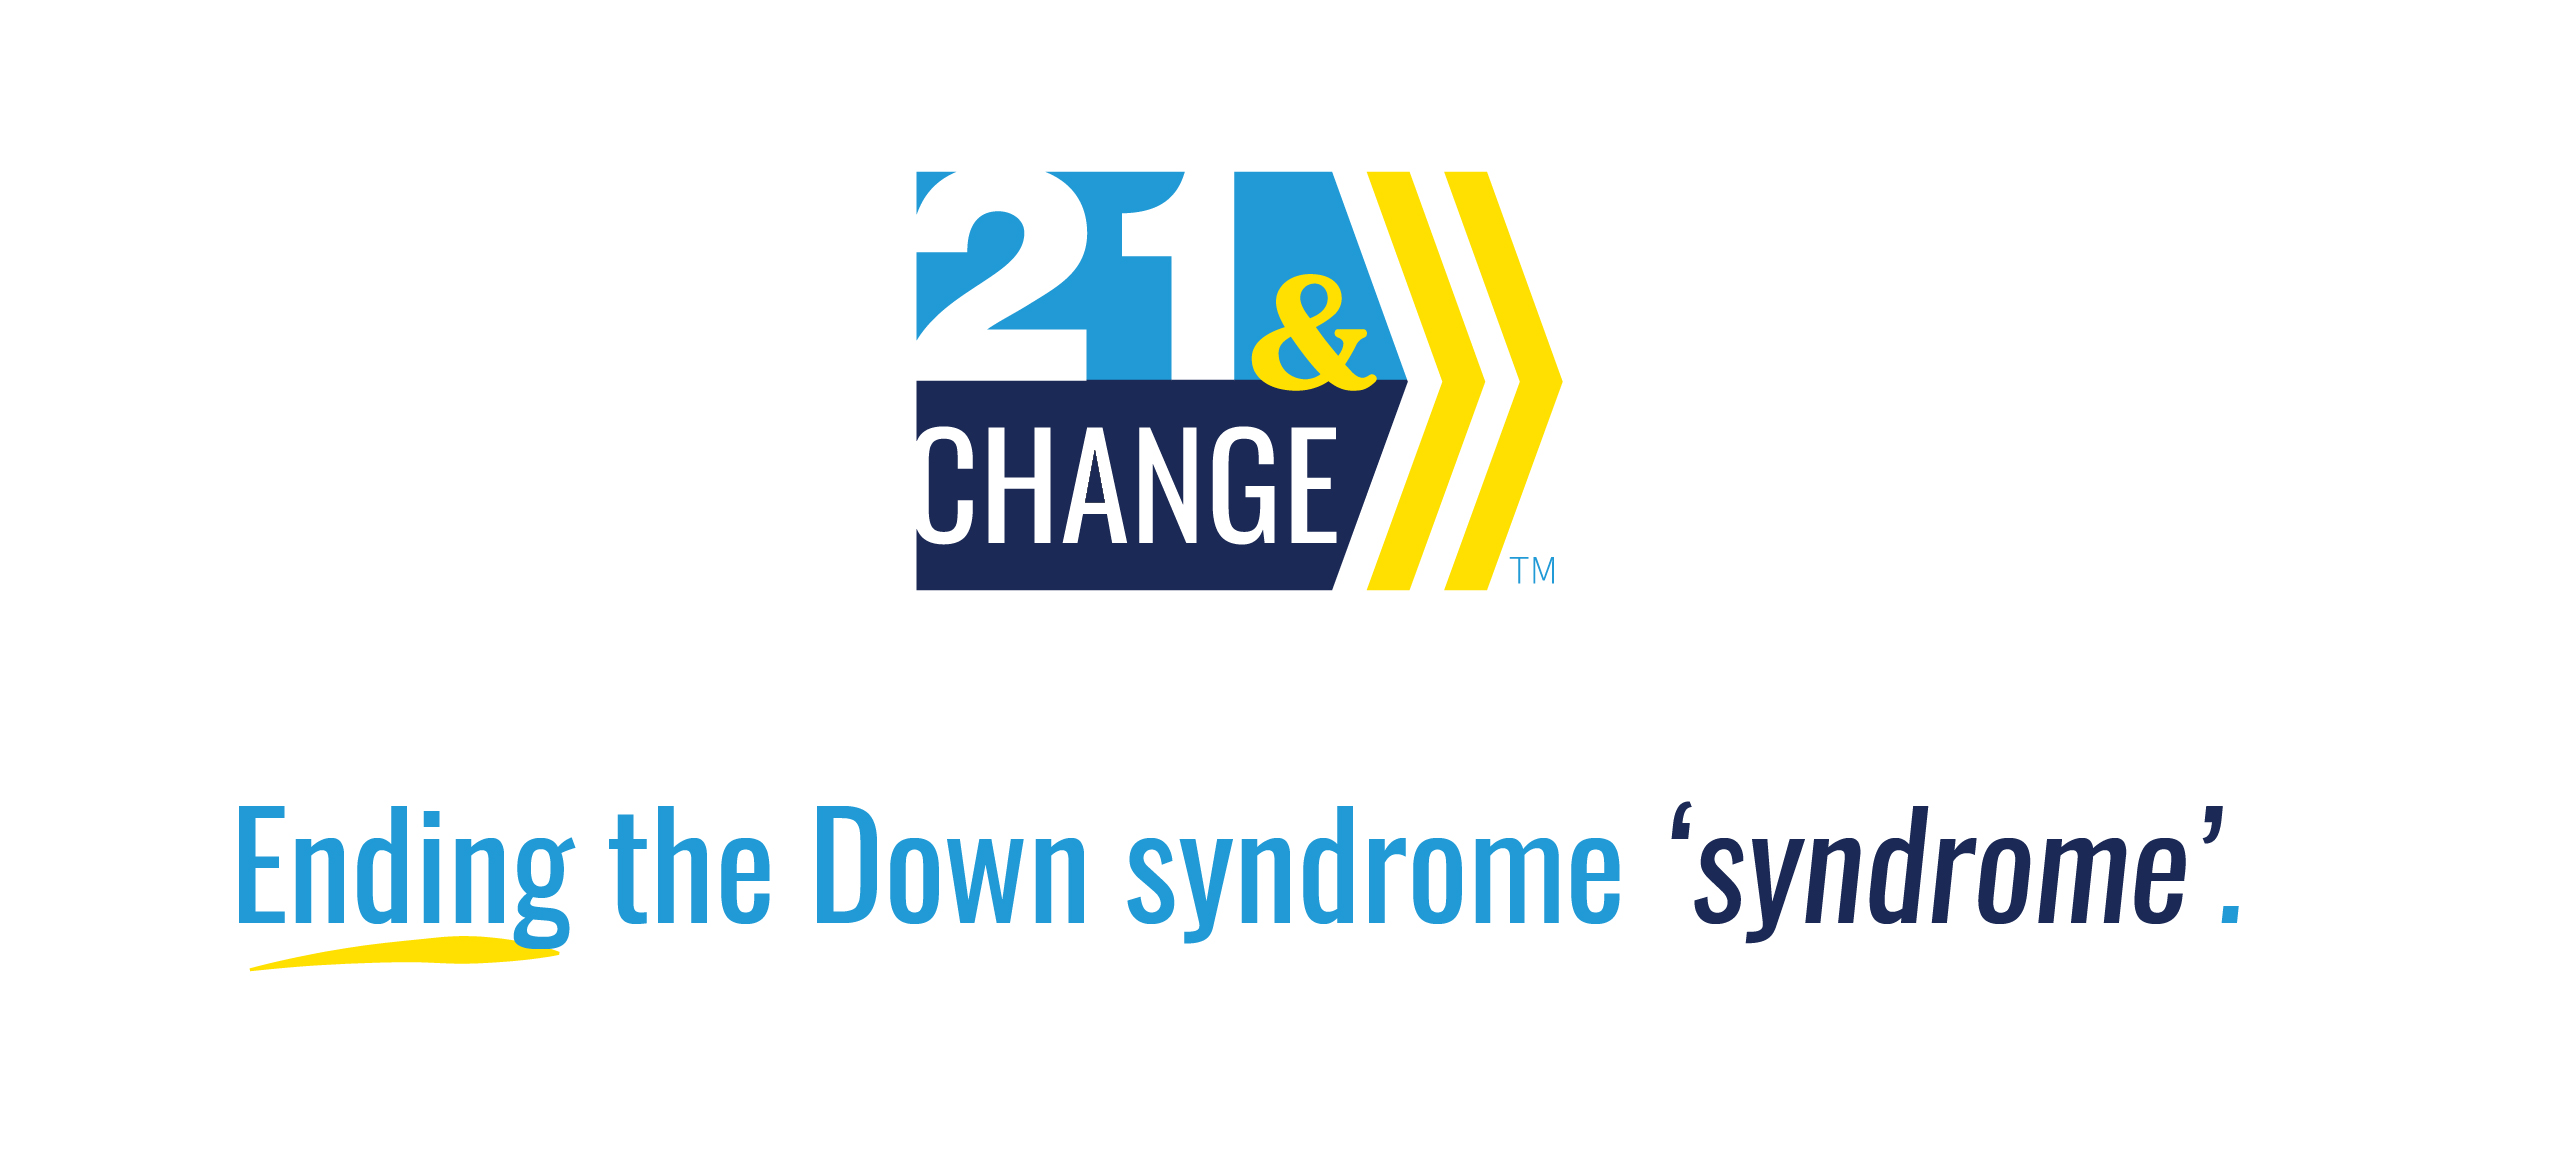 21 and Change, Ending the Down syndrome 'syndrome;